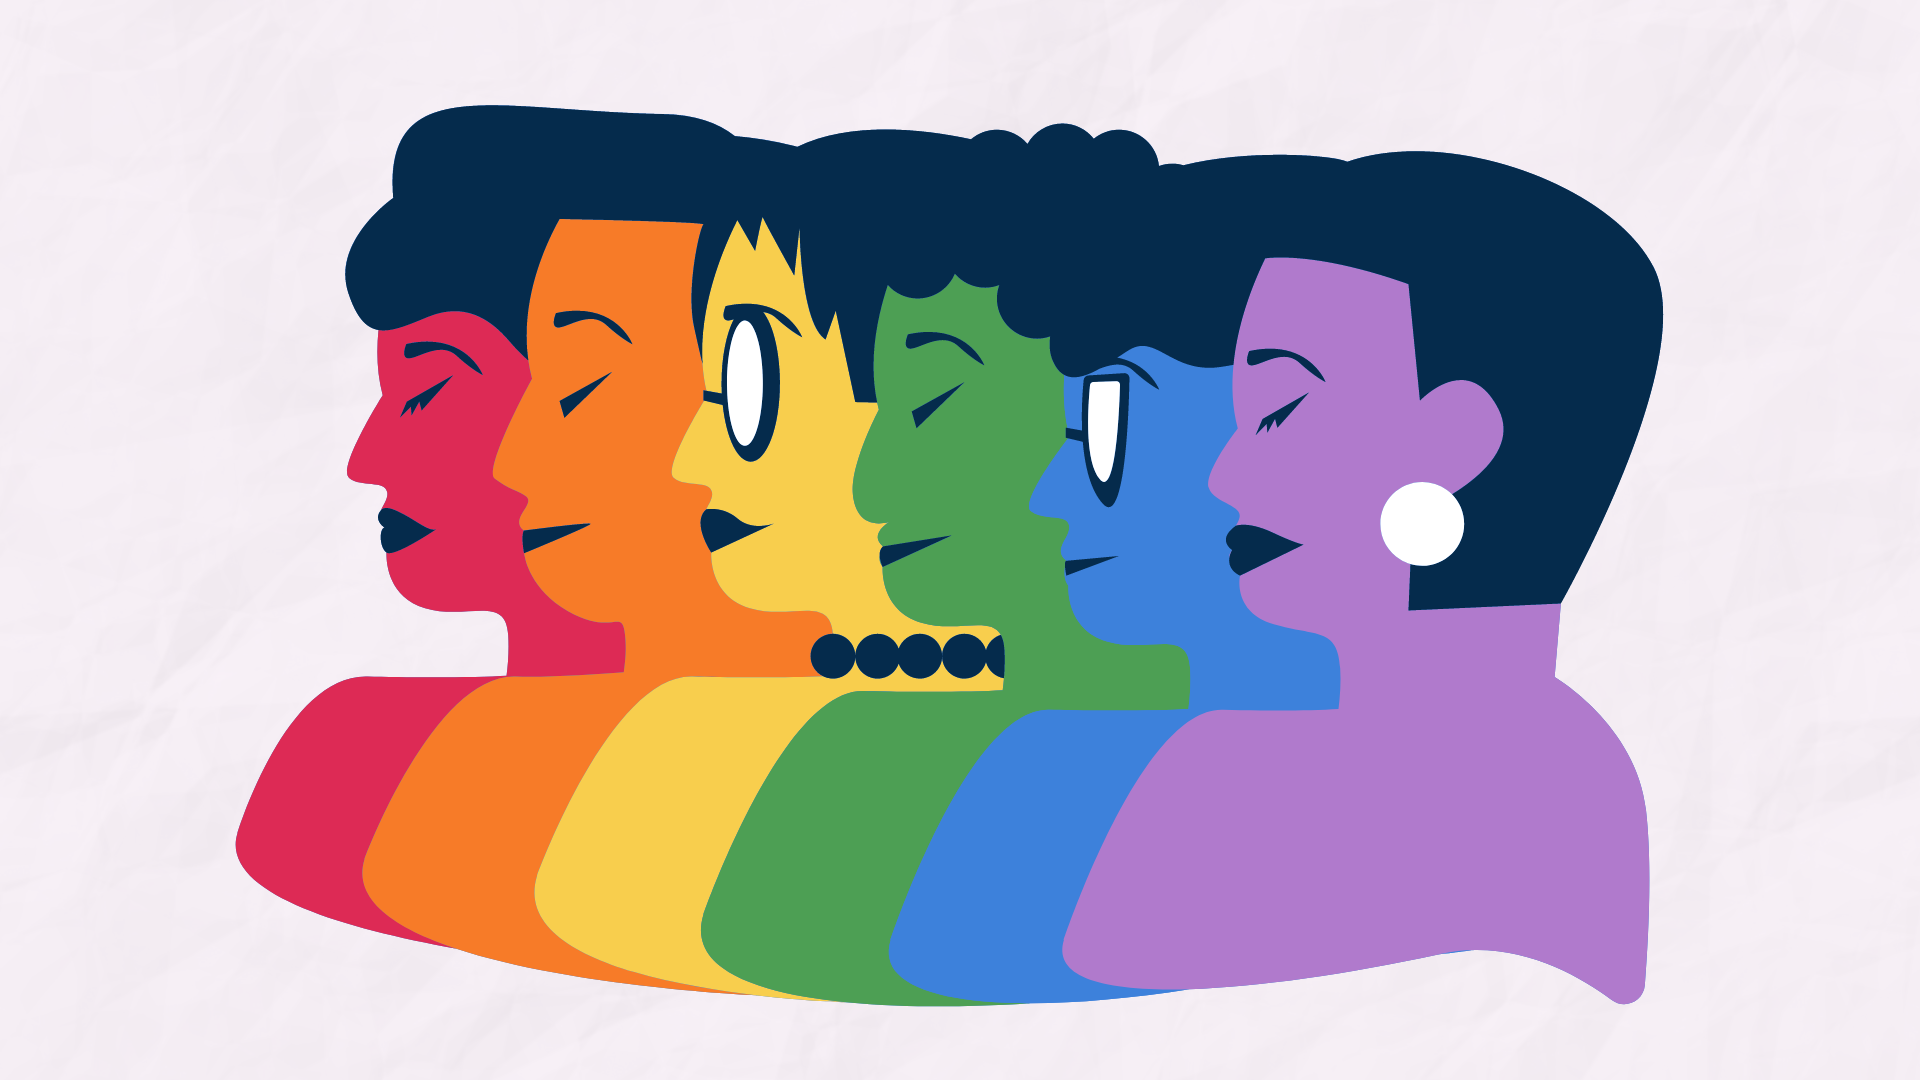 A collage of 6 individuals looking to the side. Each is colored so that they line up to form the LGBTQ+ pride flag.